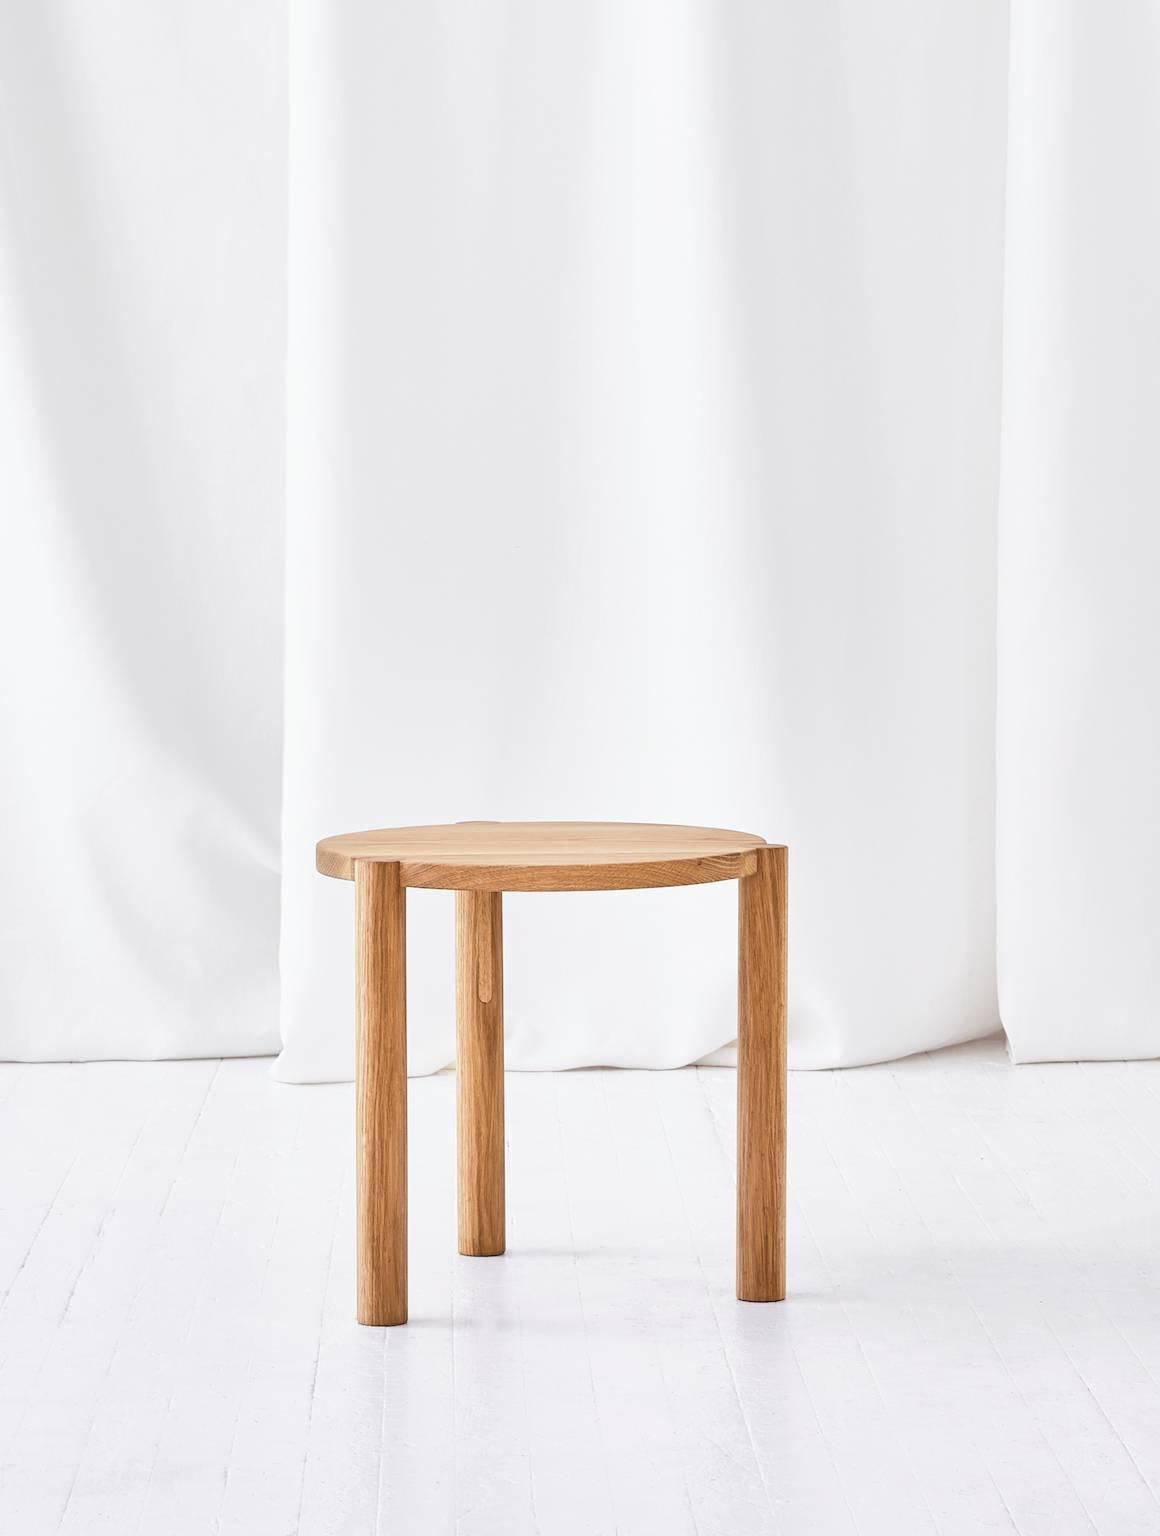 The WC4 by ASH NYC is a handsome side table with a low and sturdy stance. The hand-turned legs join seamlessly with the seat to create an elegant, handcrafted joint that defies gravity. 
 
An exercise in Minimalist design, the hidden joints allow